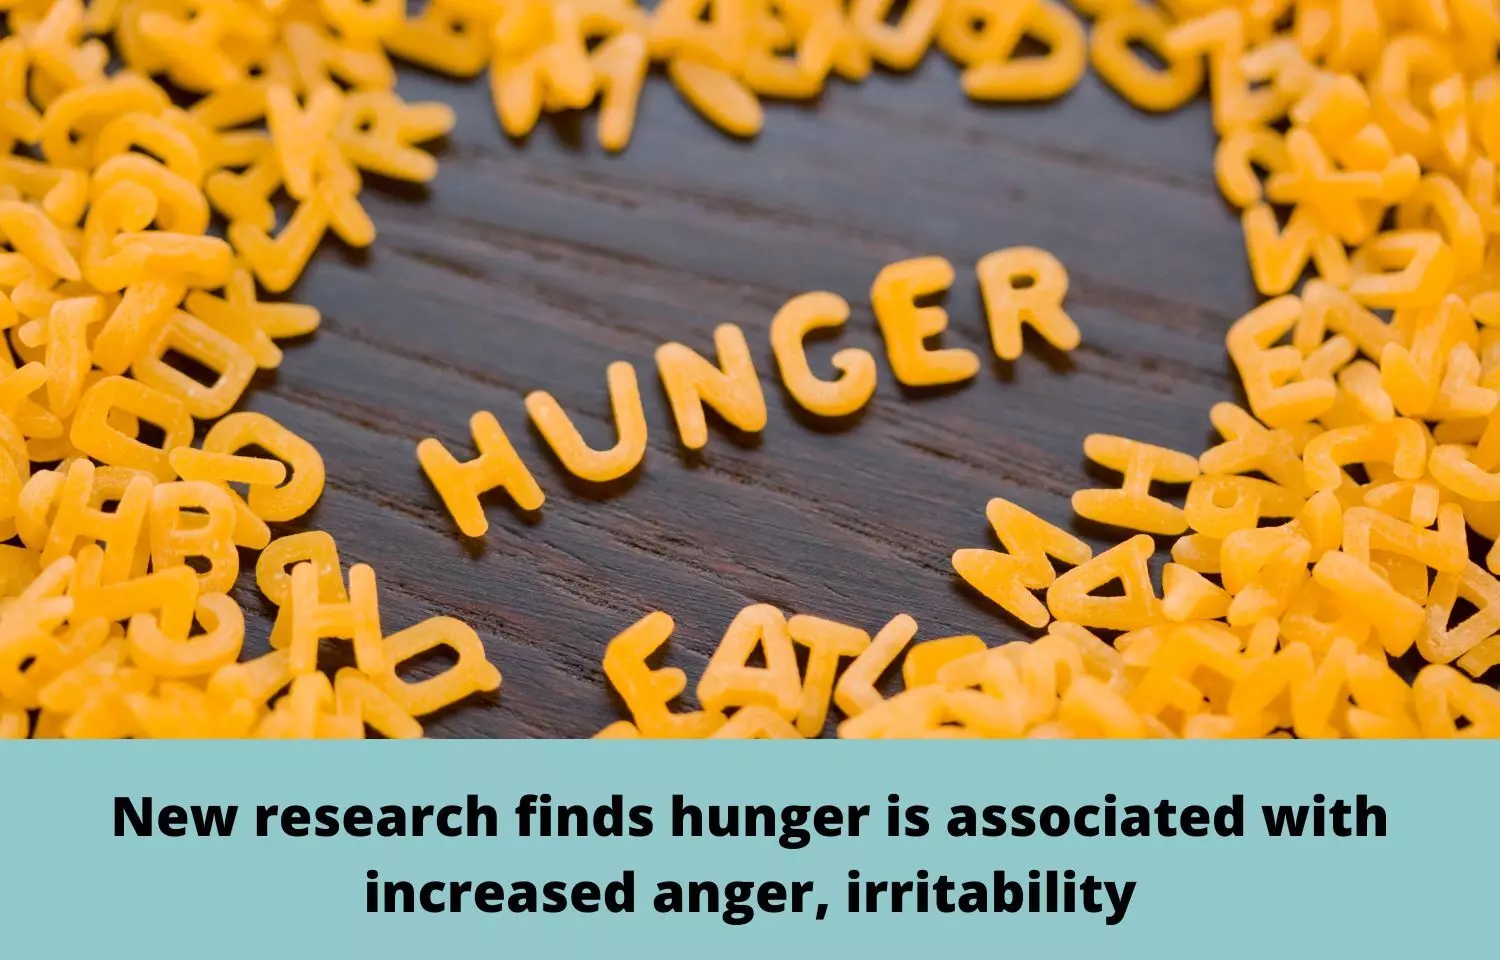 New research finds hunger is associated with increased anger, irritability